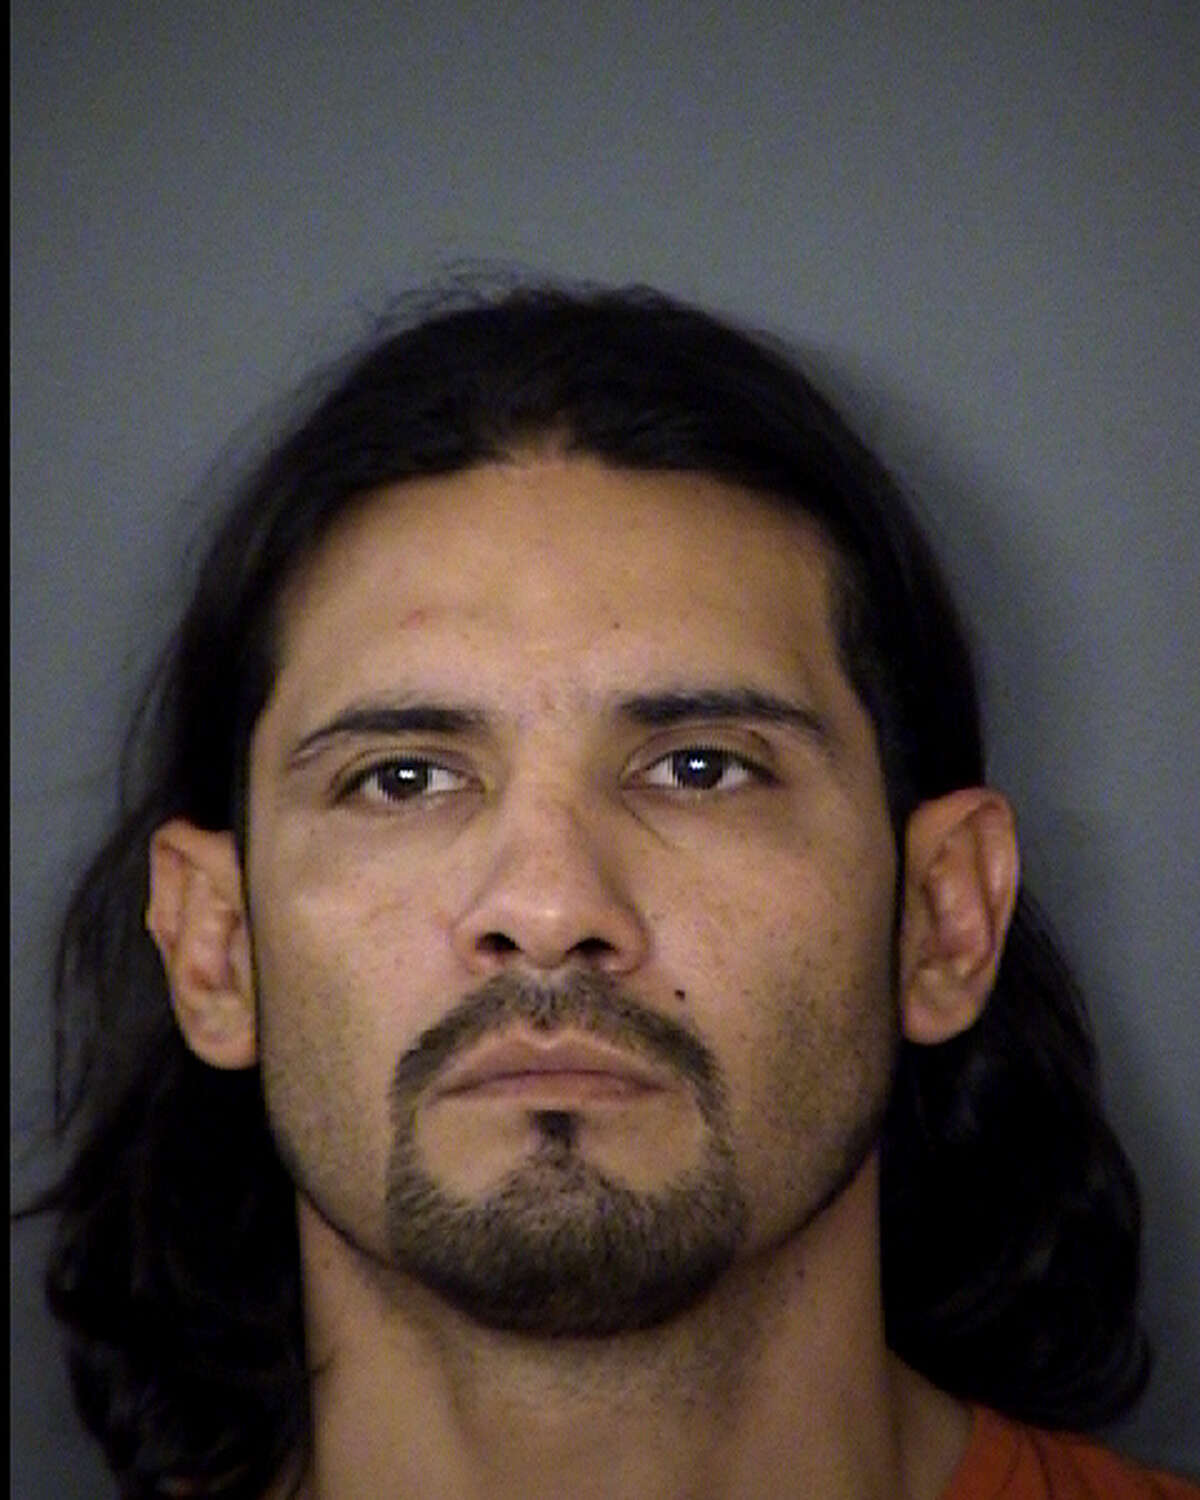 Francisco Rios-Cerda, 38, is accused of stealing $4,000 worth of equipment from an Alamo Heights home where he was contracted for lawn service on Jan. 22, 2016.